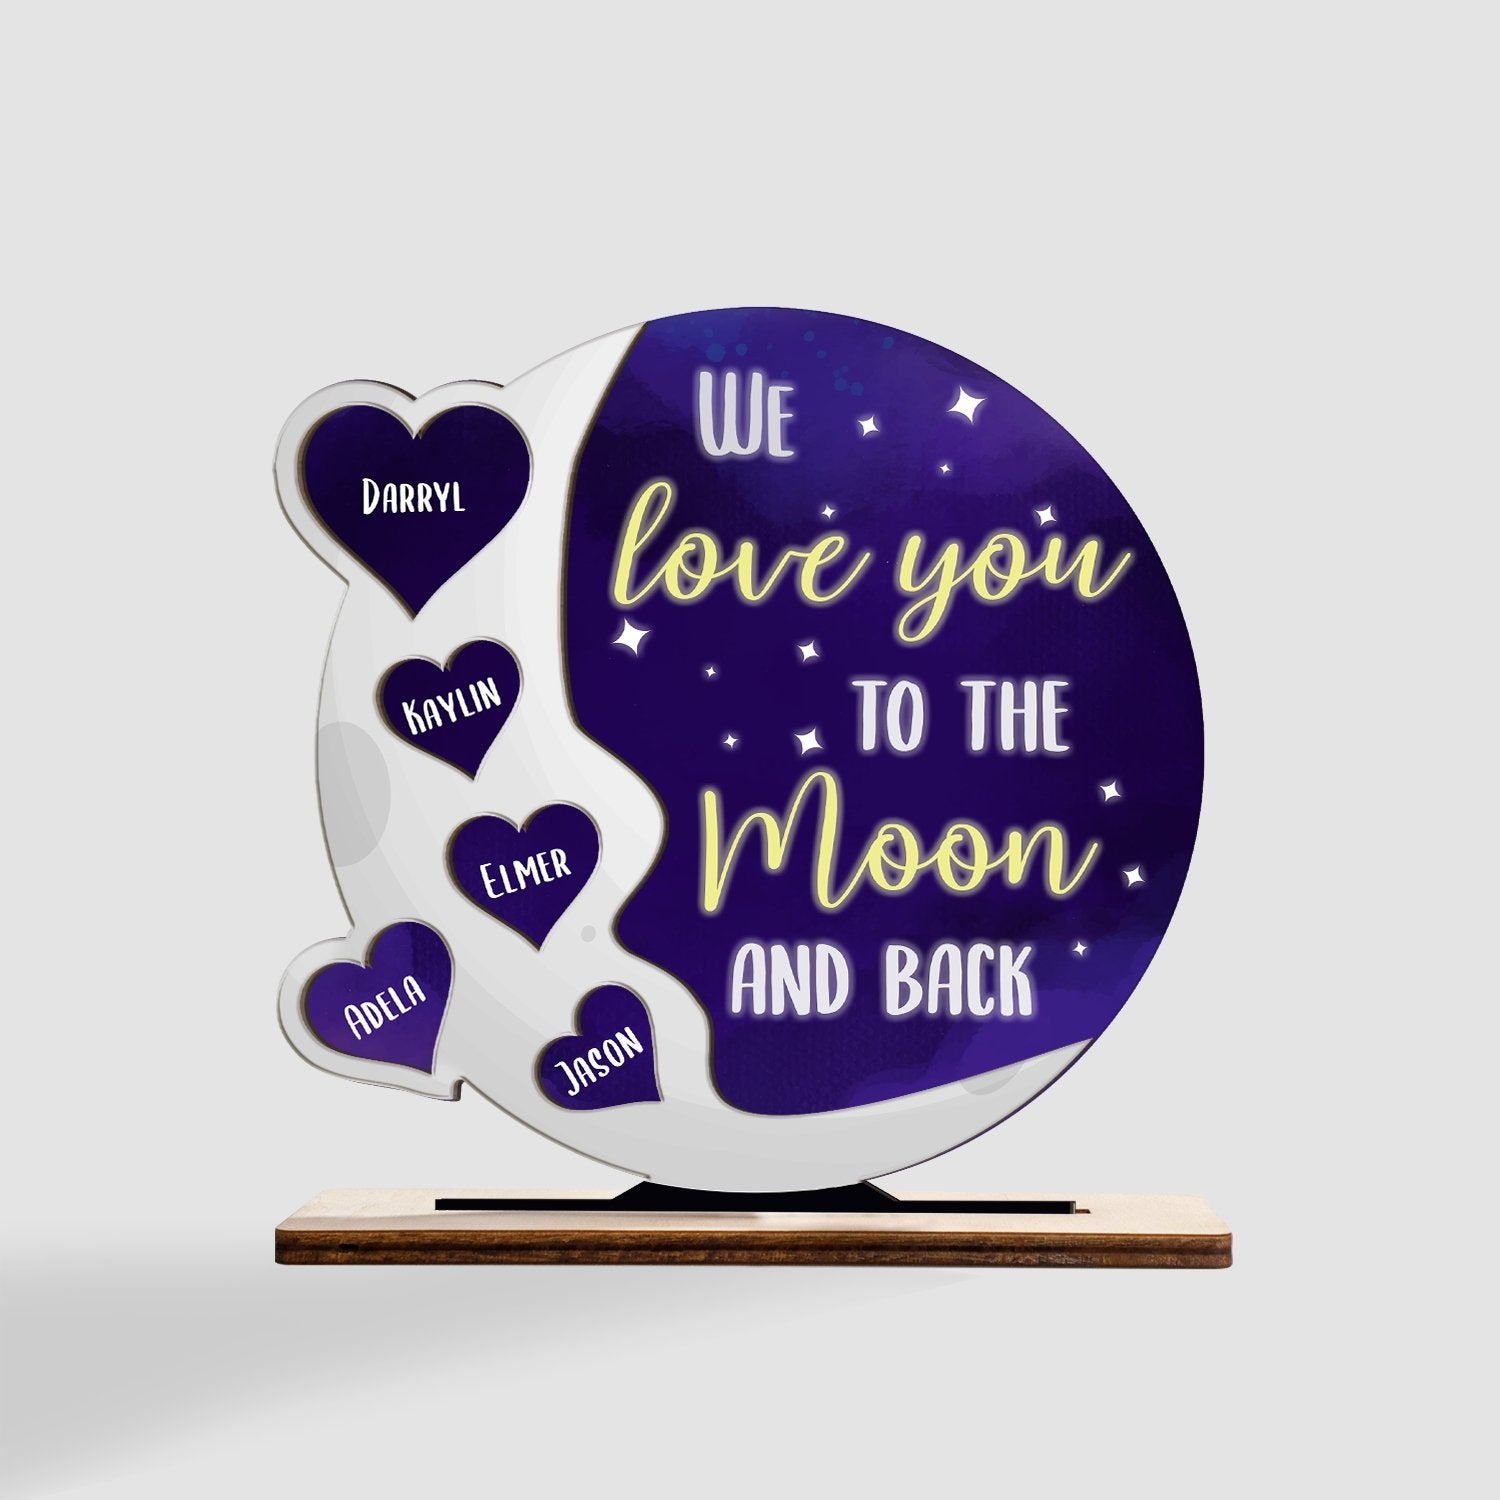 We Love You To The Moon And Back Back, Wooden Plaque 3 Layers